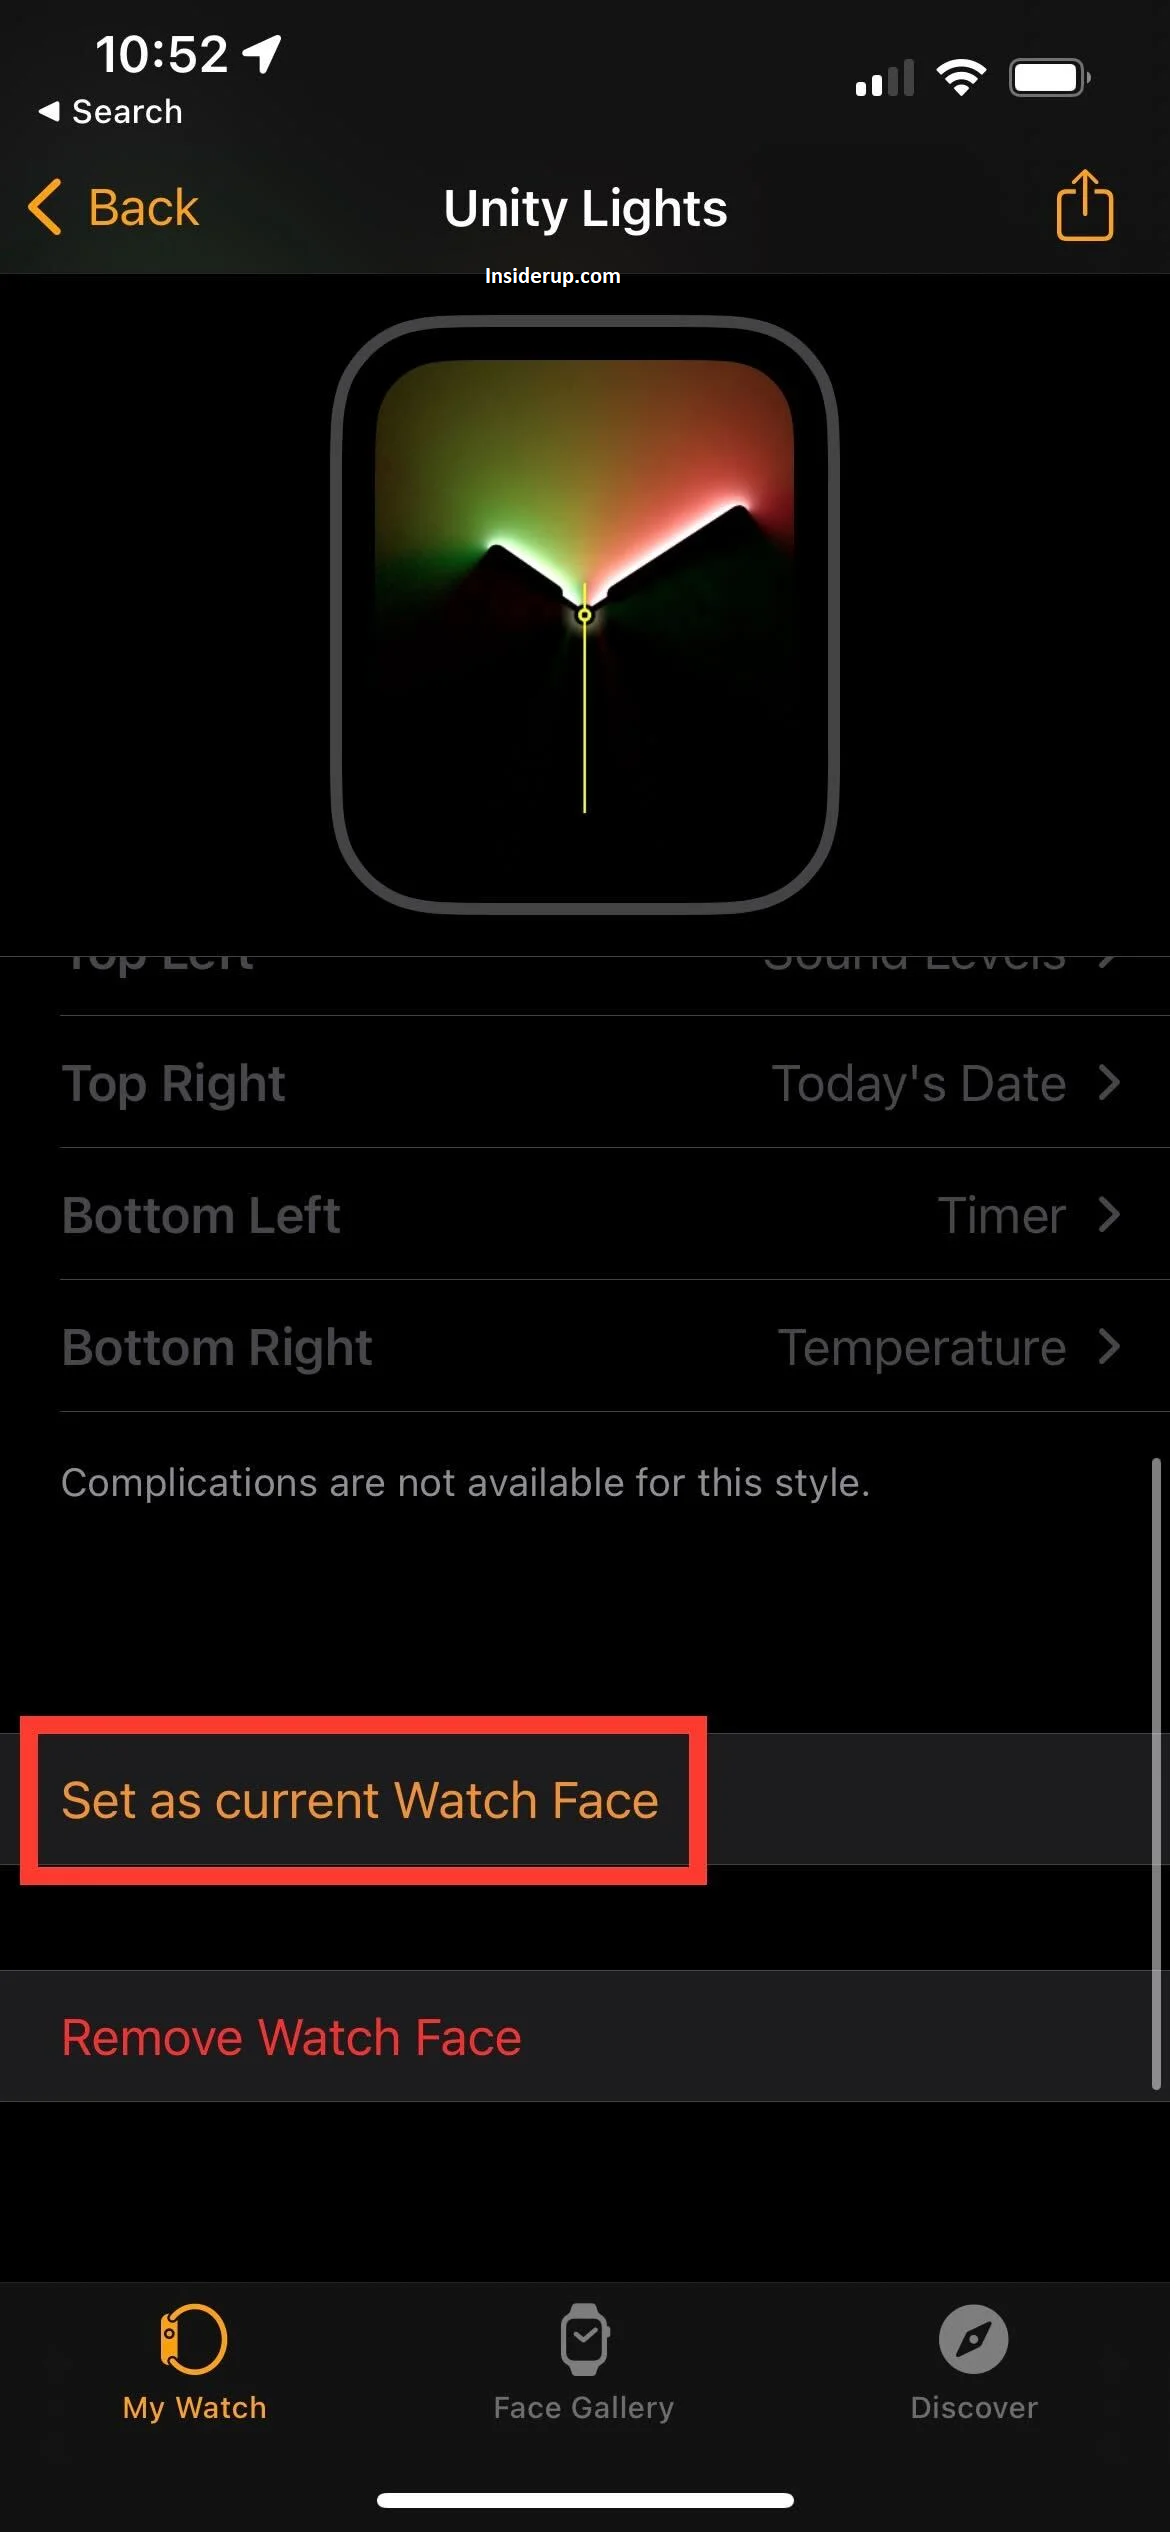 On iPhone, use the Watch app to access even more customization options.